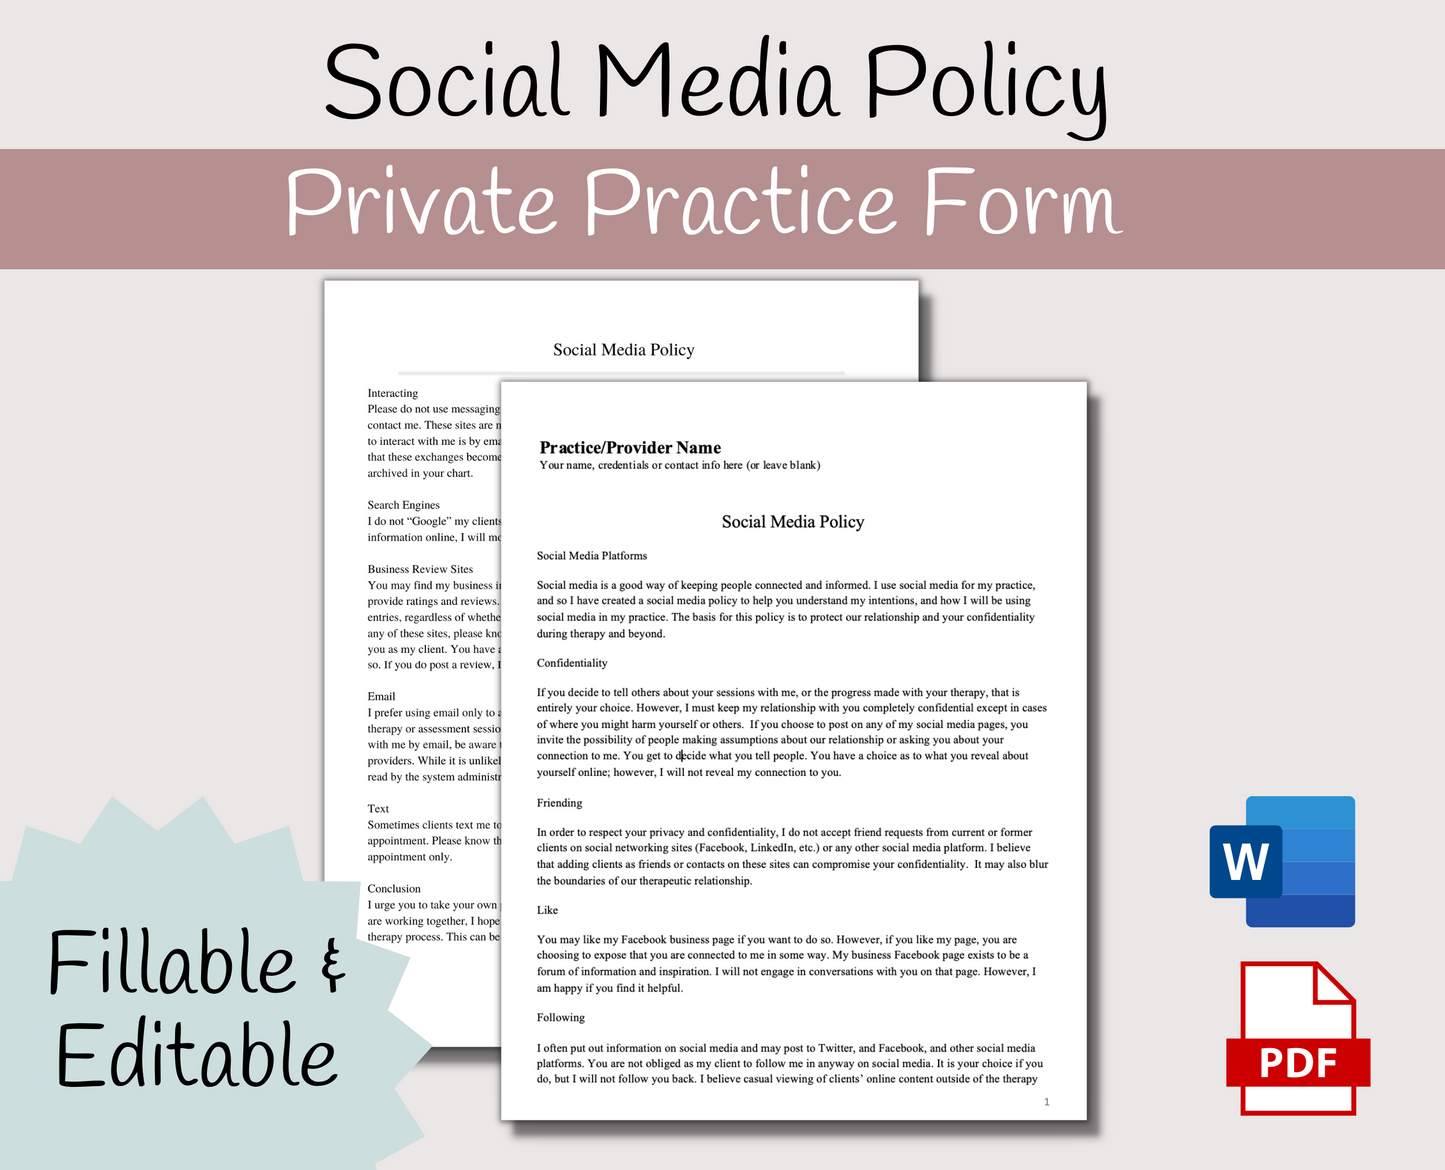 Social Media Policy for Mental Health Private Practice